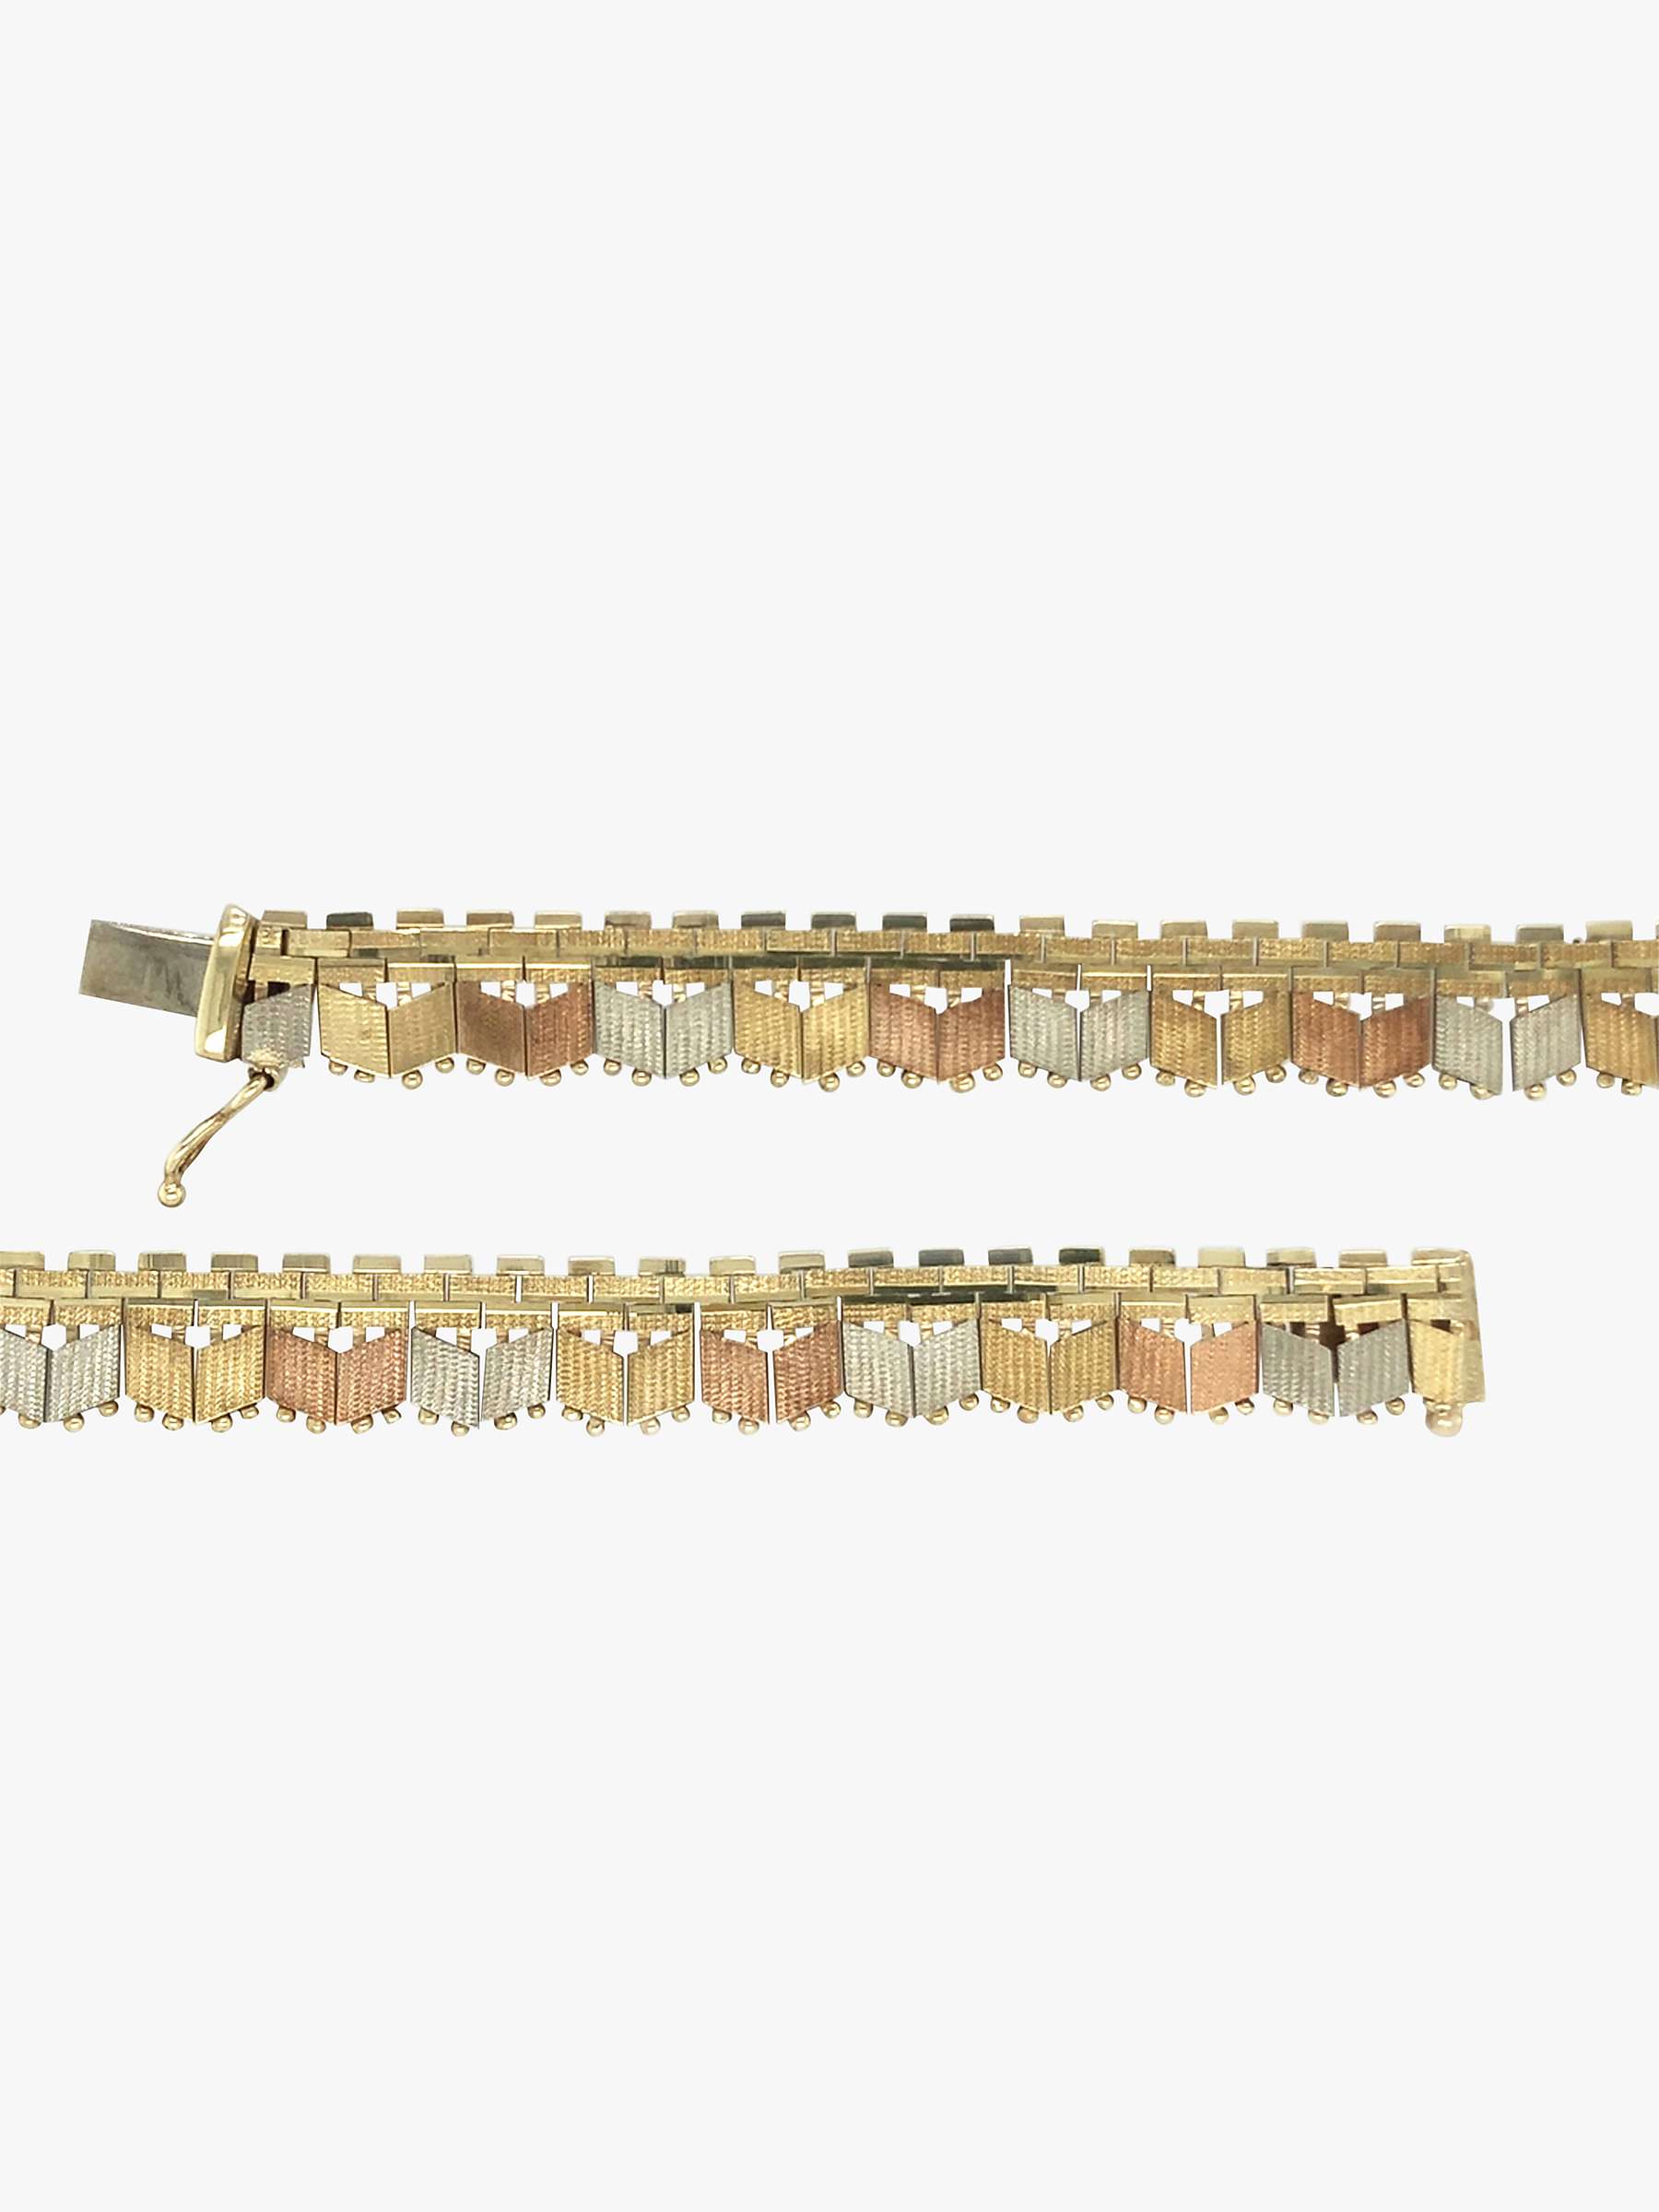 Buy Vintage Fine Jewellery Second Hand 9ct Yellow, Rose & White Fringe Collar Necklace, Dated London 1978 Online at johnlewis.com